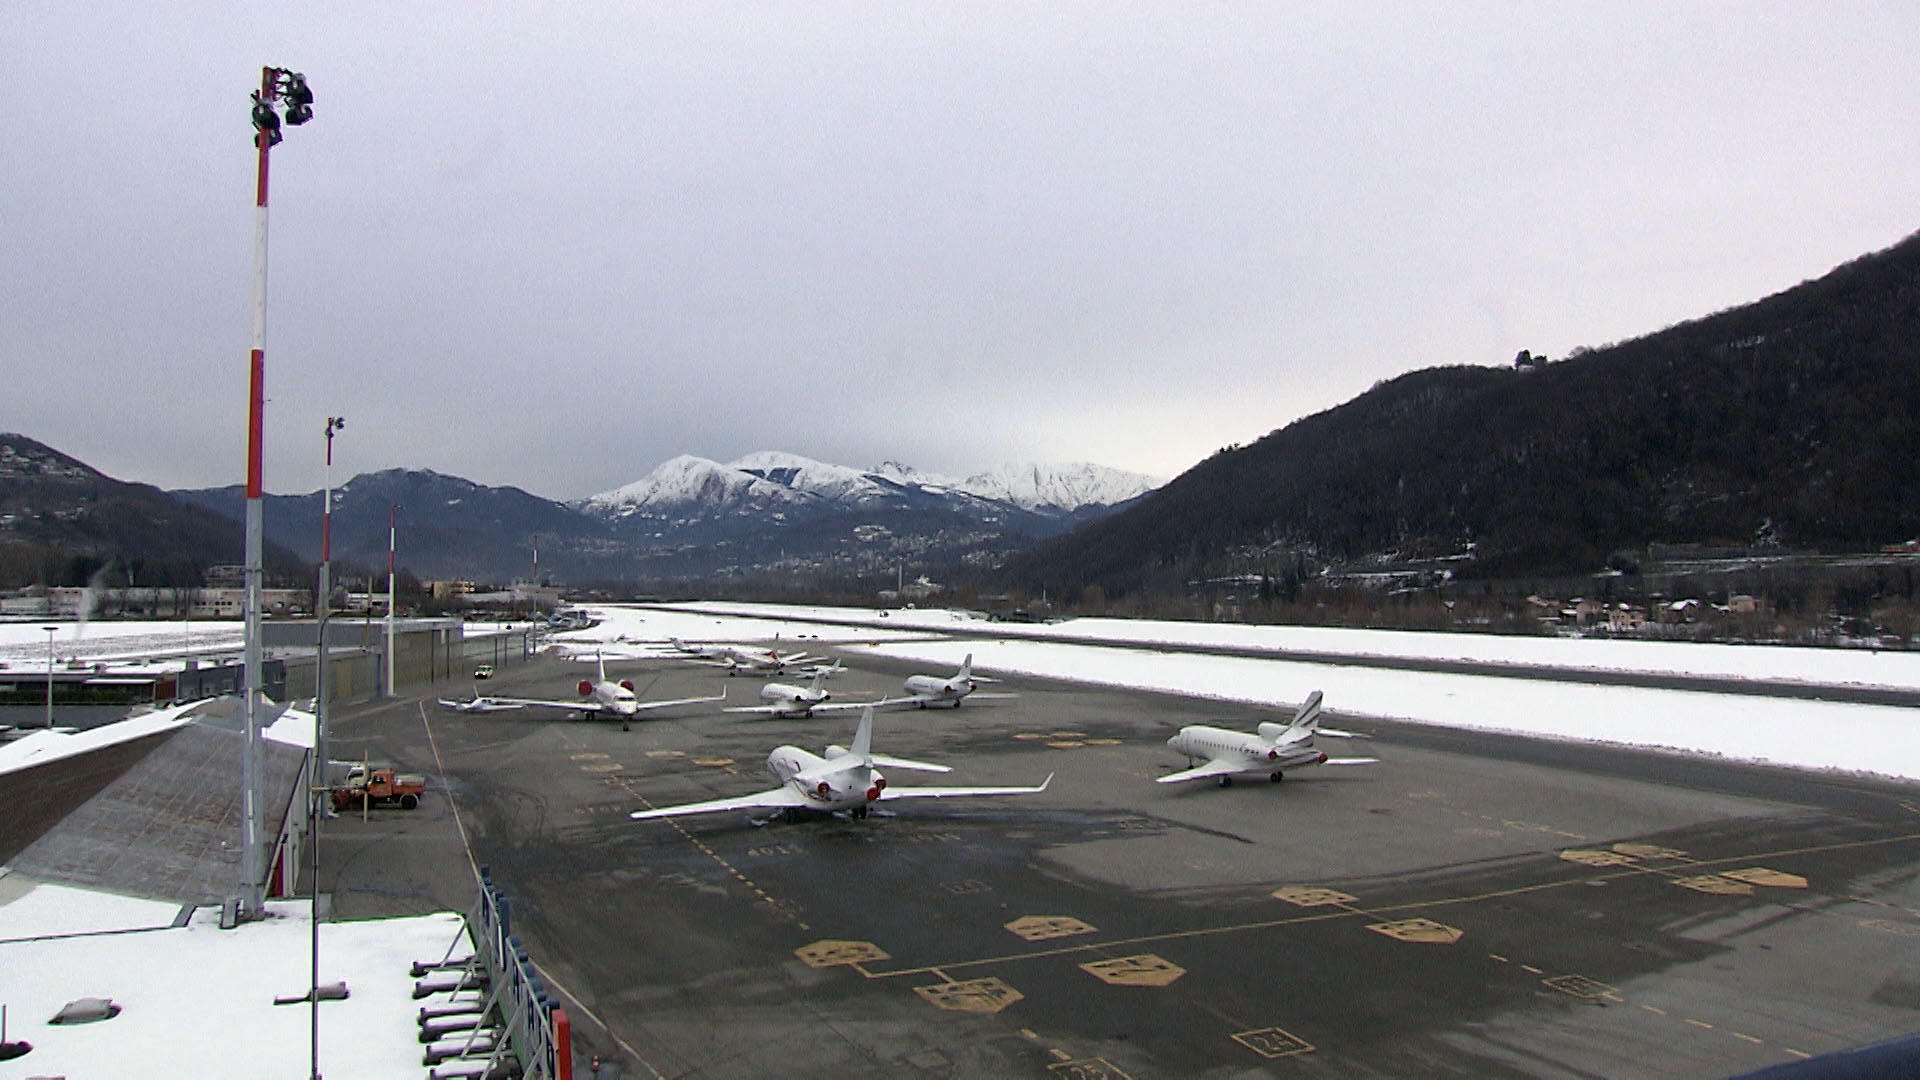 Lugano airport with mountains in the background